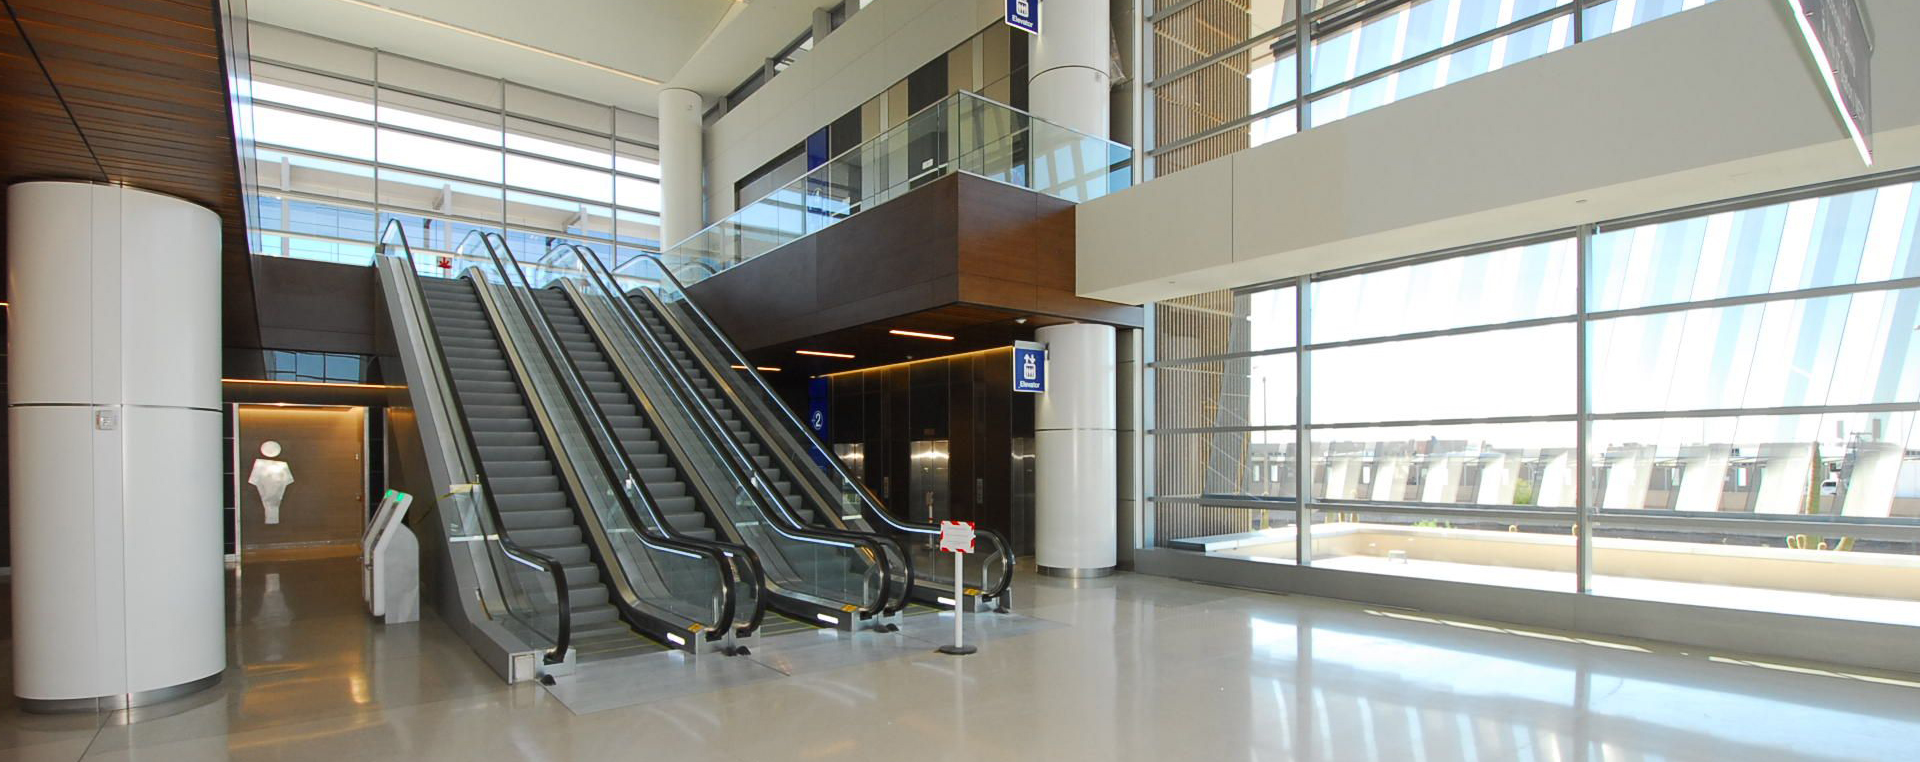 A T3 escalator in Sky Harbor International Airport with large windows.